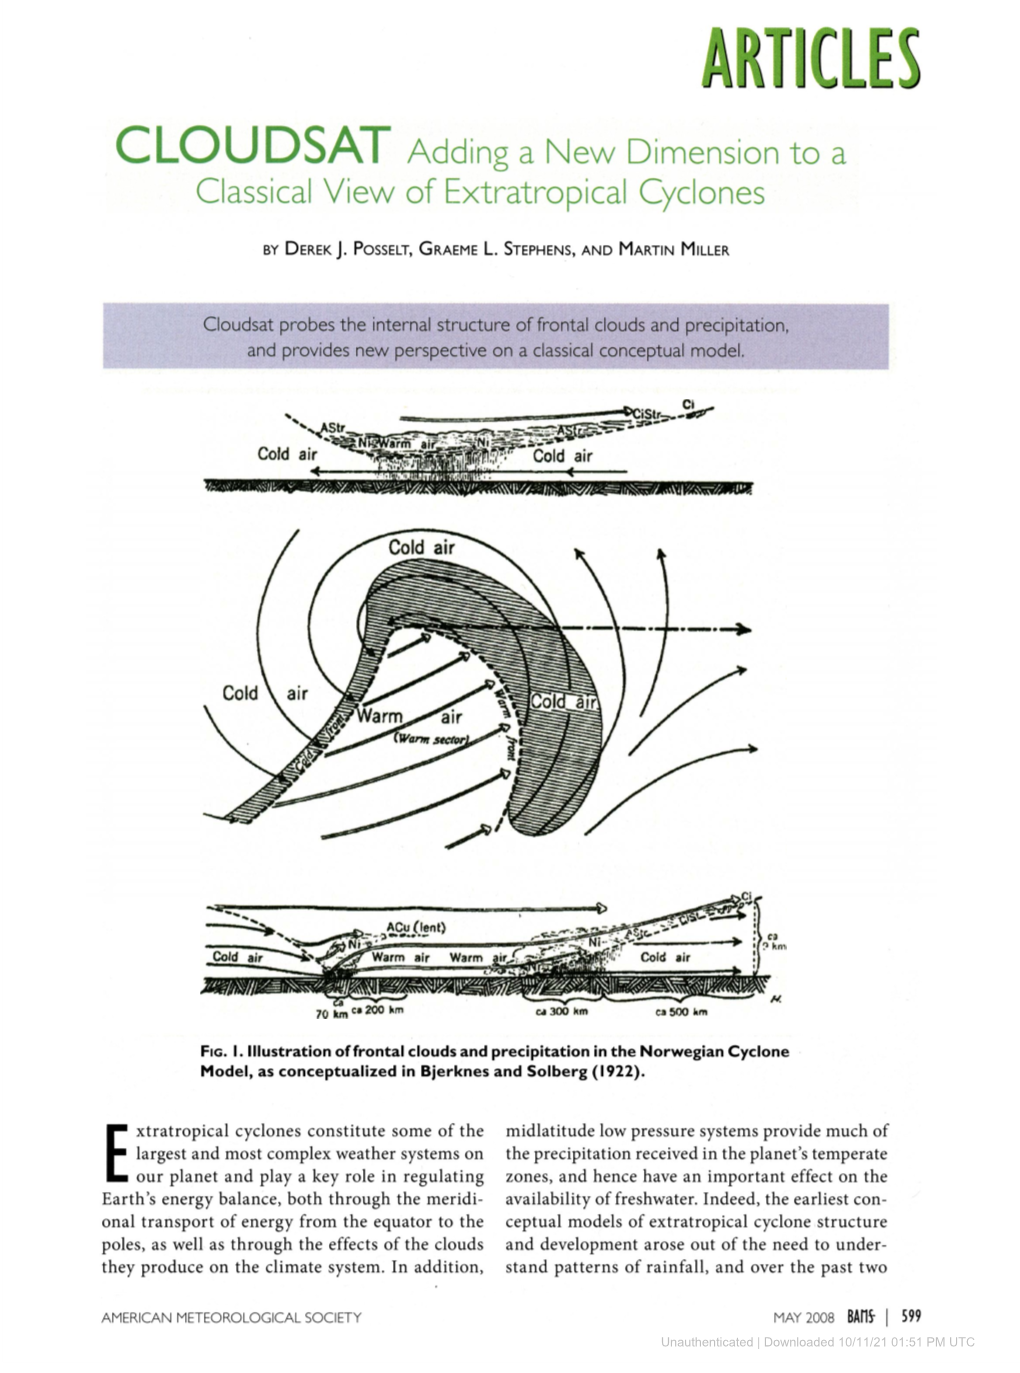 ARTICLES CLOUDSAT Adding a New Dimension to a Classical View of Extratropical Cyclones